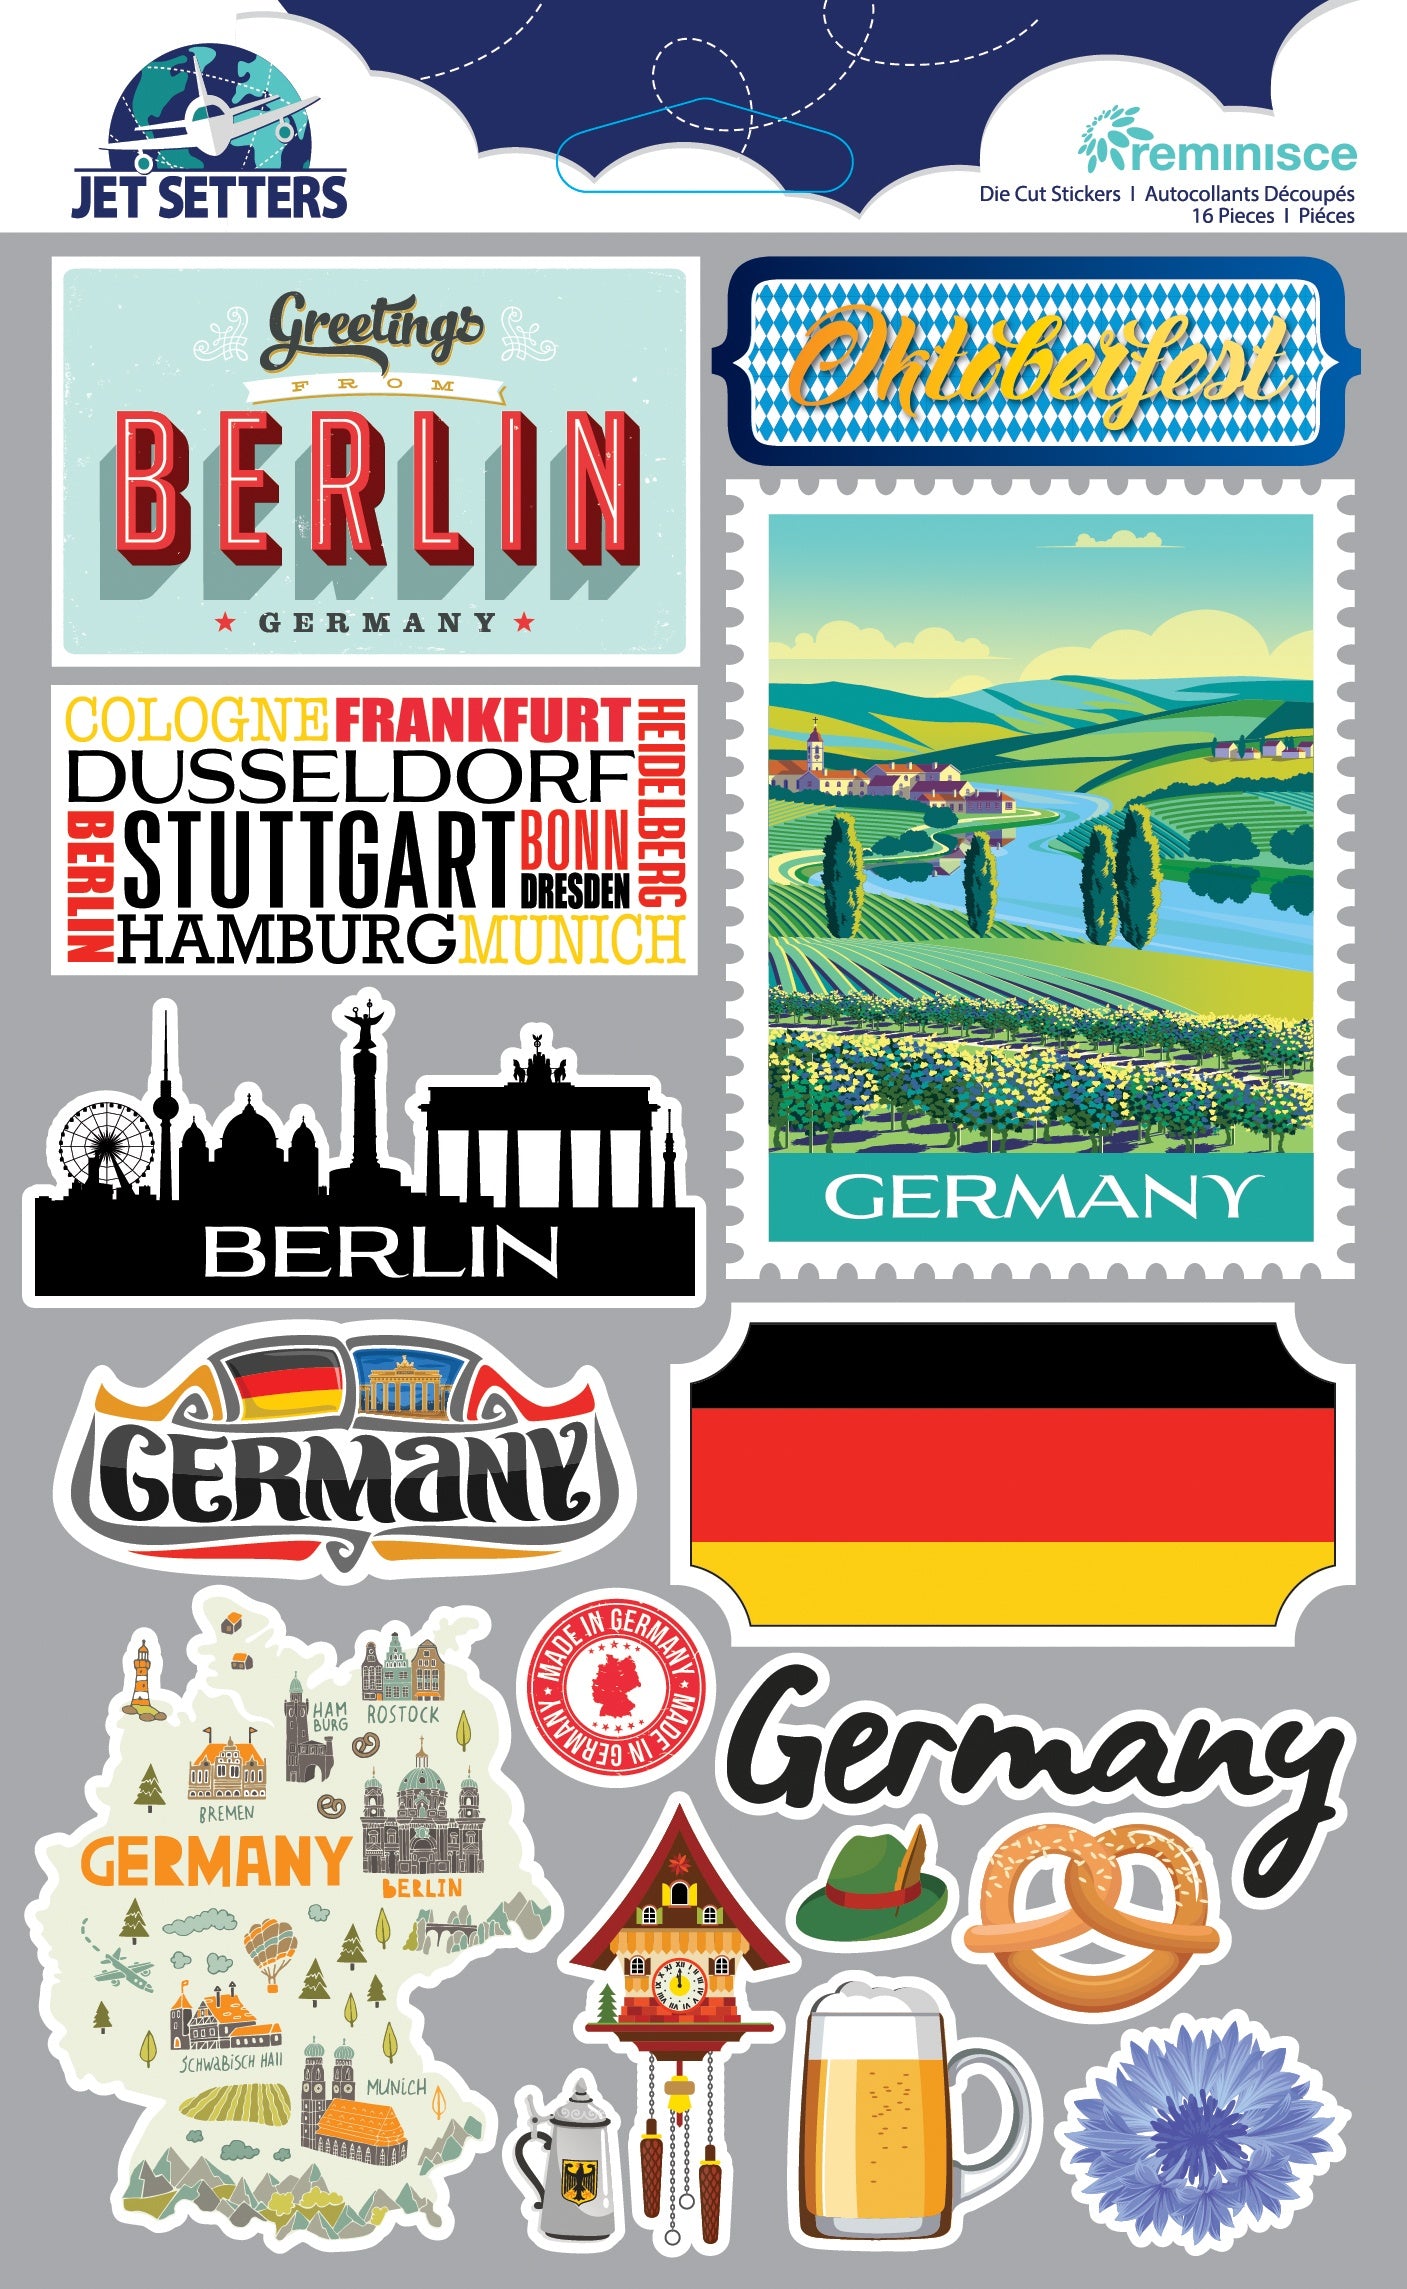 Jetsetters World Collection Berlin, Germany 4.5 x 7 Scrapbook Embellishment by Reminisce